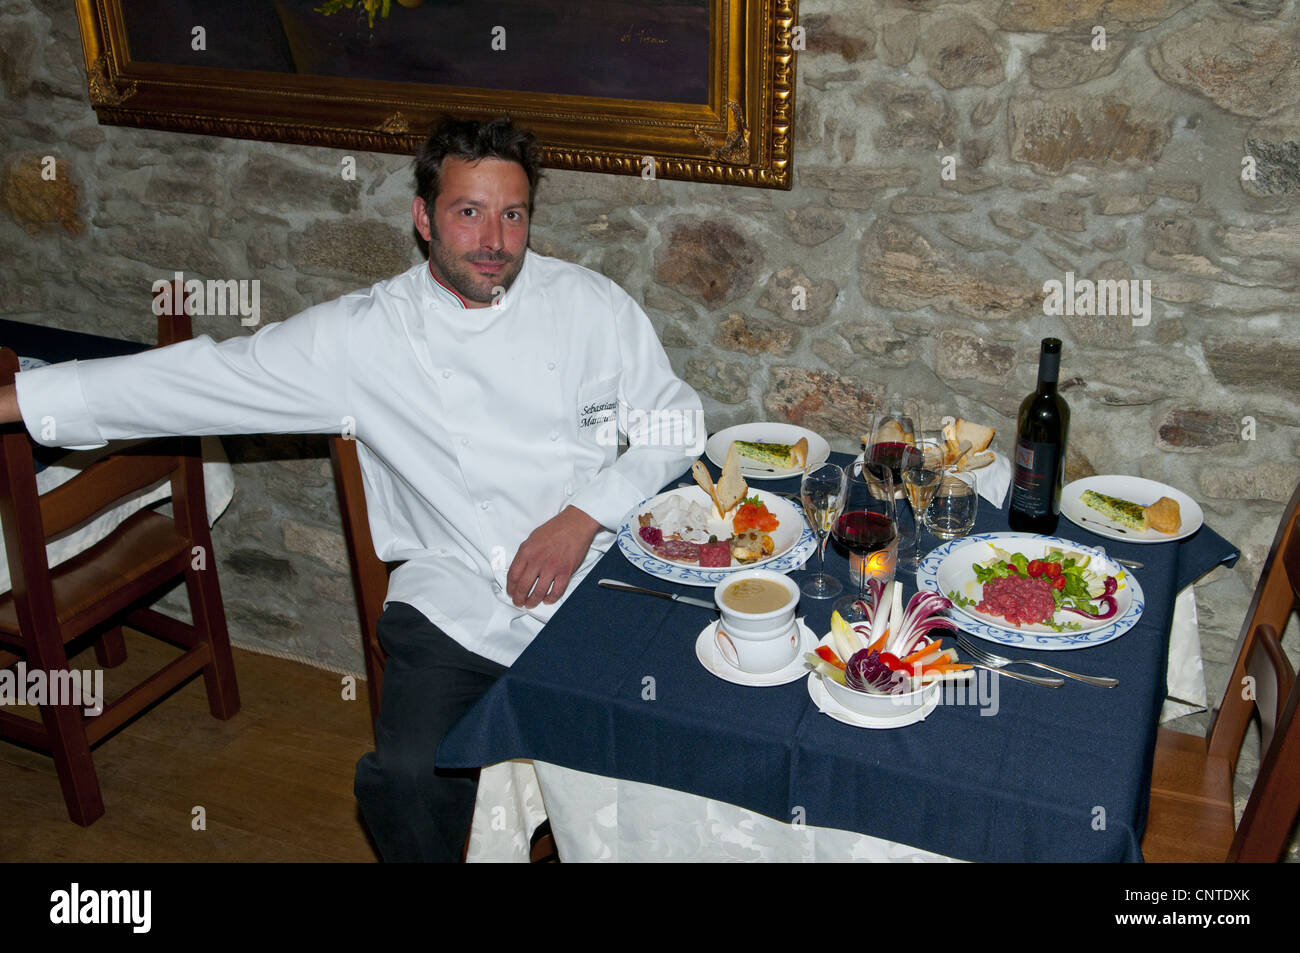 italian cook at the table with his plate, Lake orta, Piedmont, Italy Stock Photo